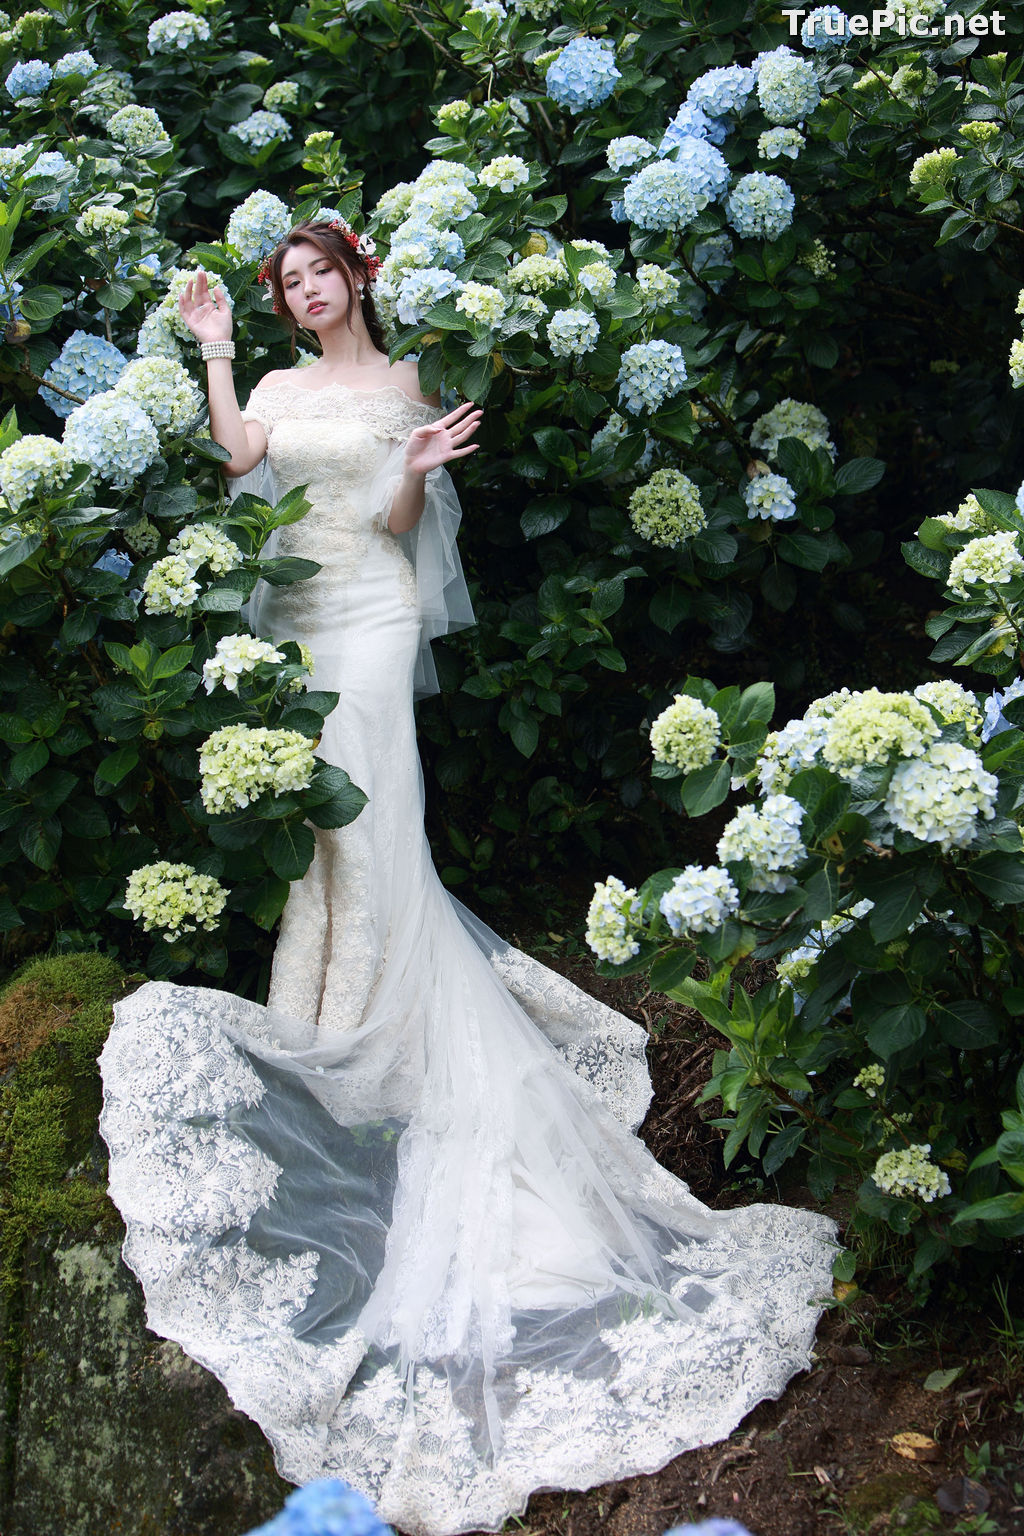 Image Taiwanese Model - 張倫甄 - Beautiful Bride and Hydrangea Flowers - TruePic.net - Picture-60